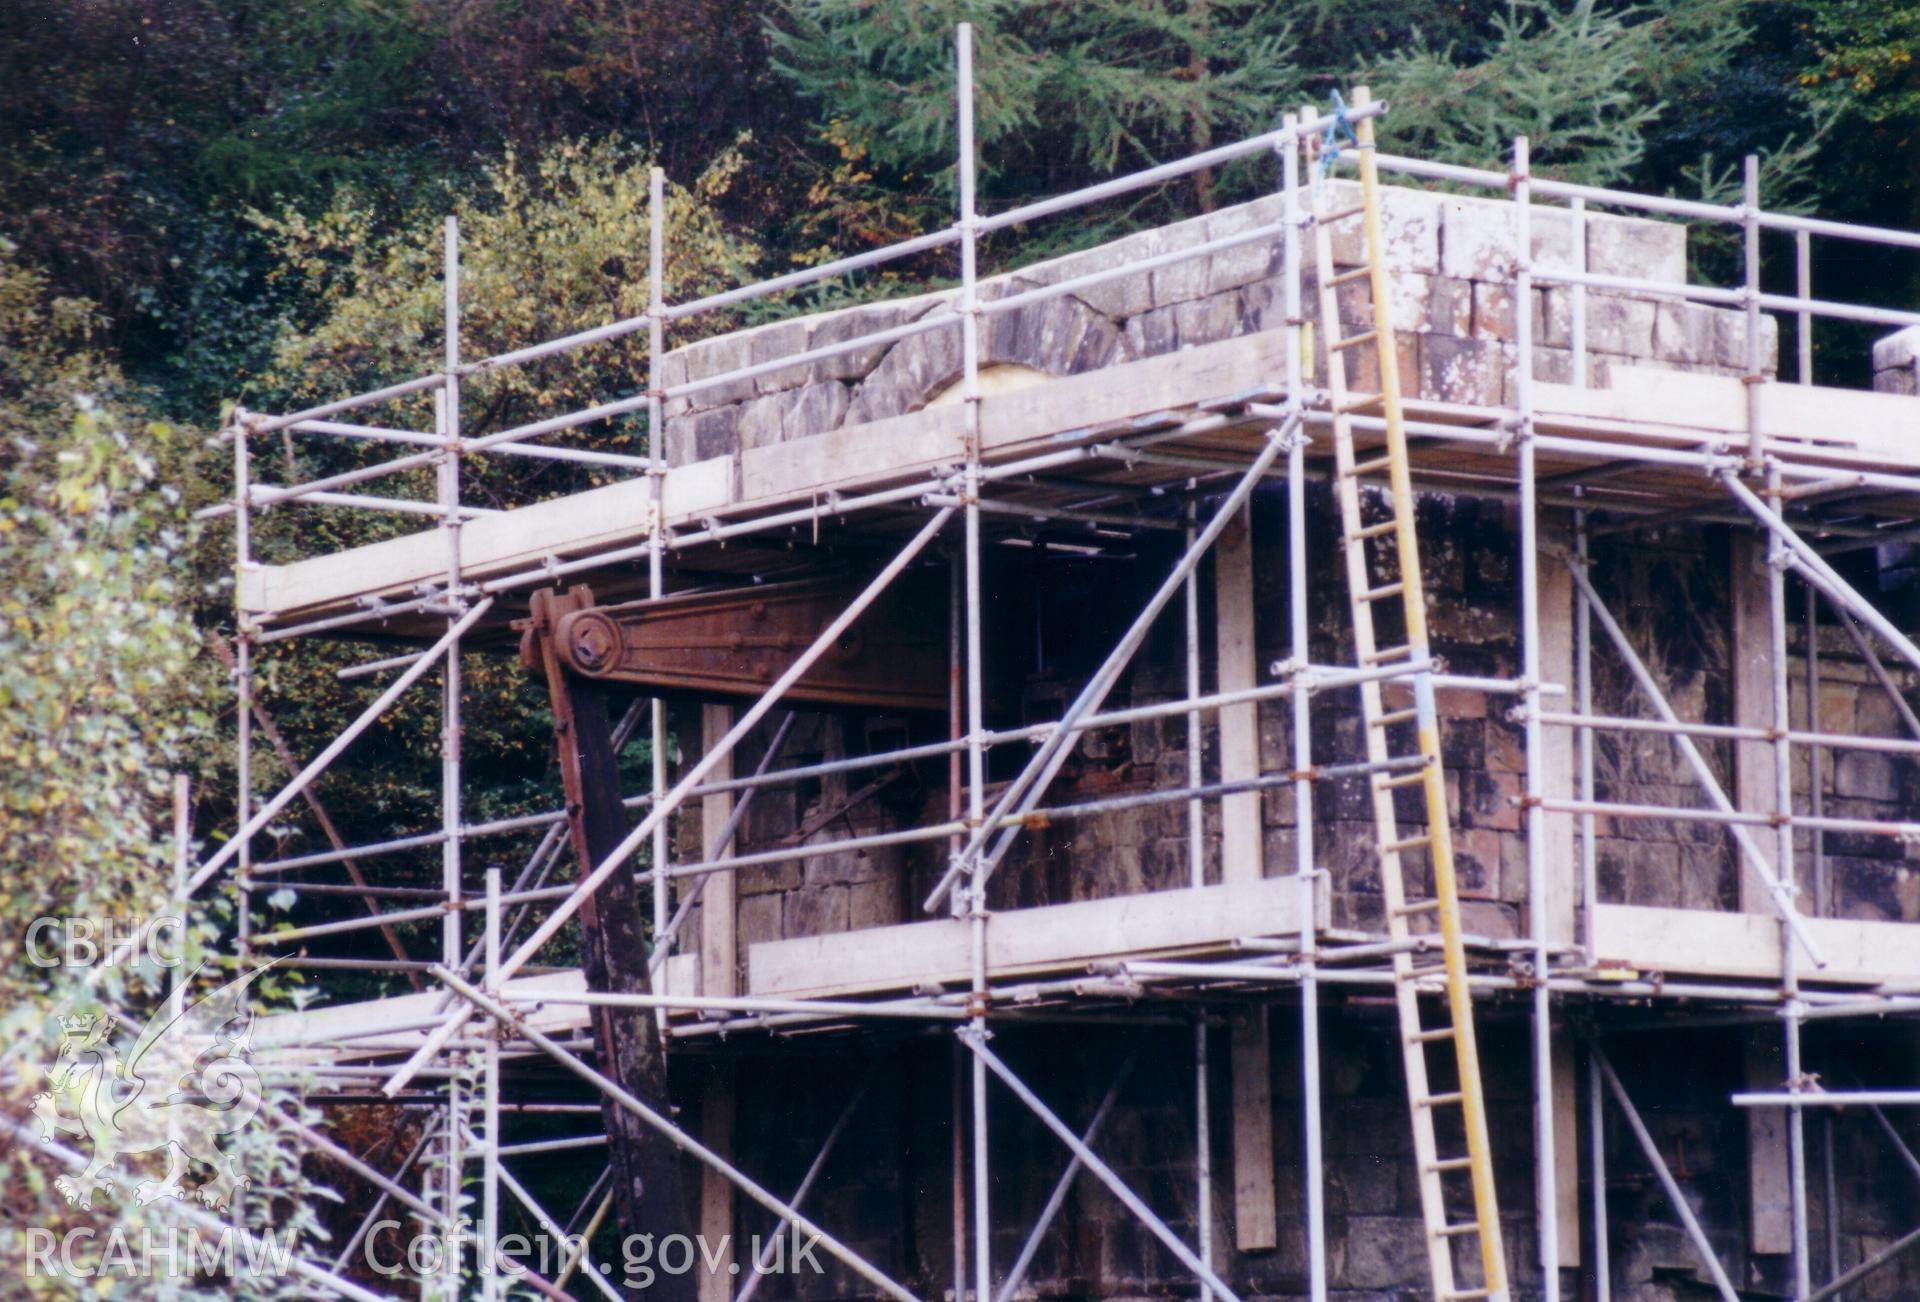 Close up of vertical engine house with scaffolding.